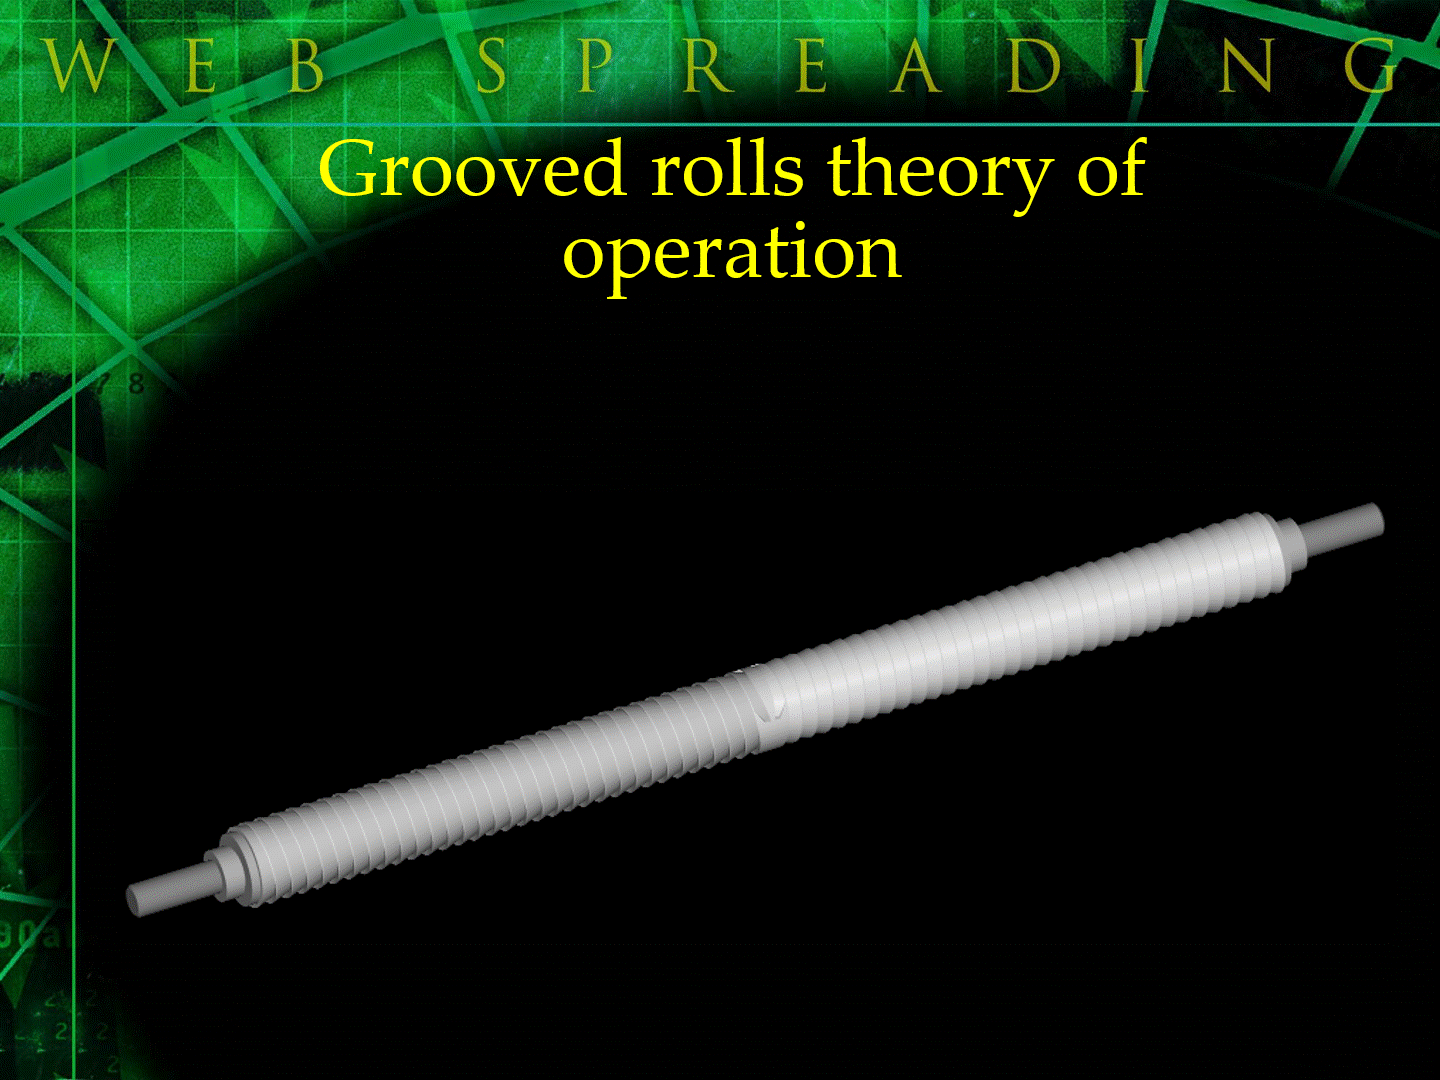 https://www.converteraccessory.com/news/images/grooved-rolls-theory.gif